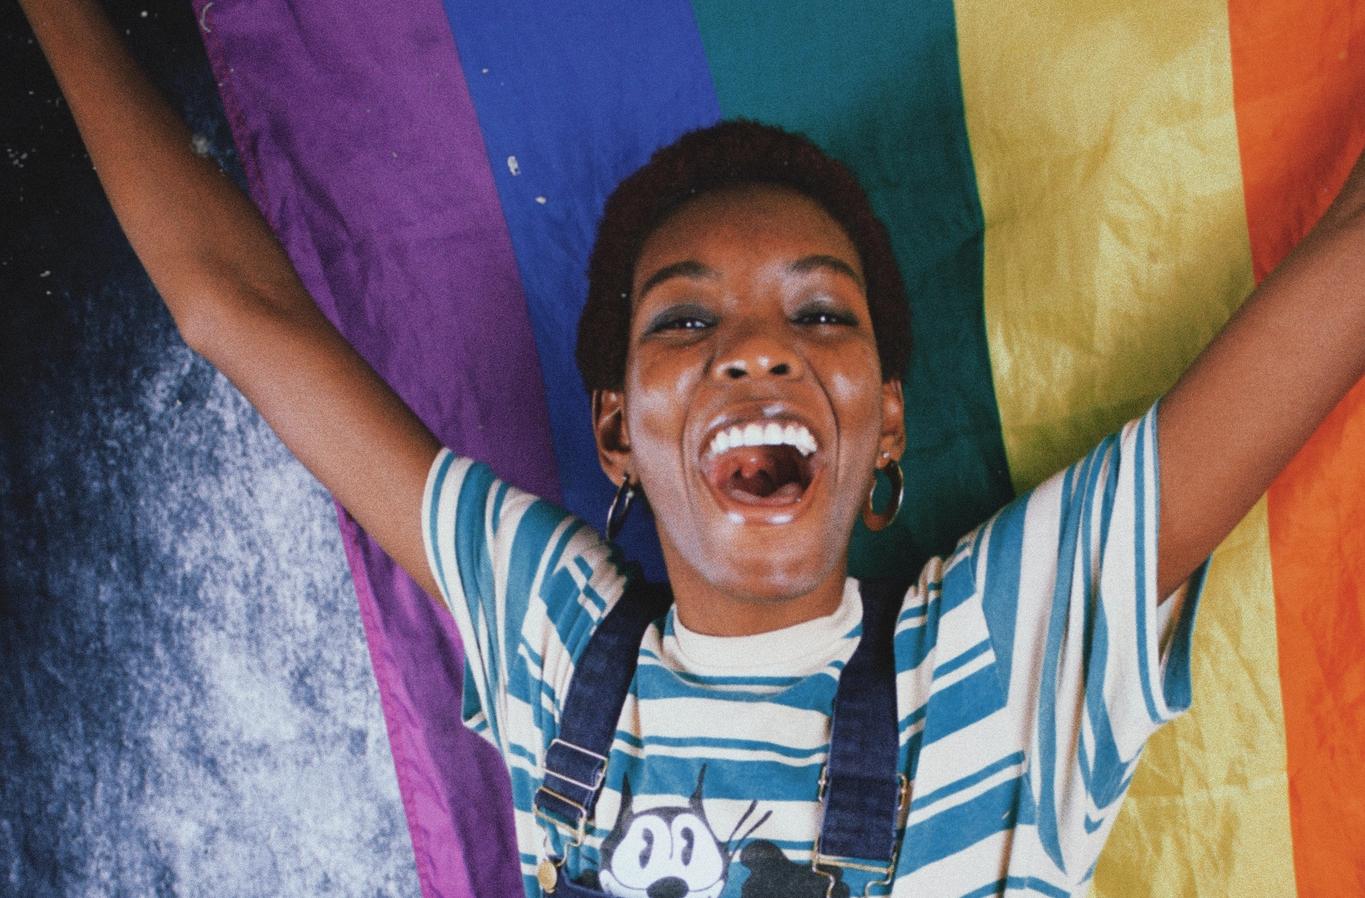 A woman holds up a rainbow flag and cheers. Illustration image from Unsplash.